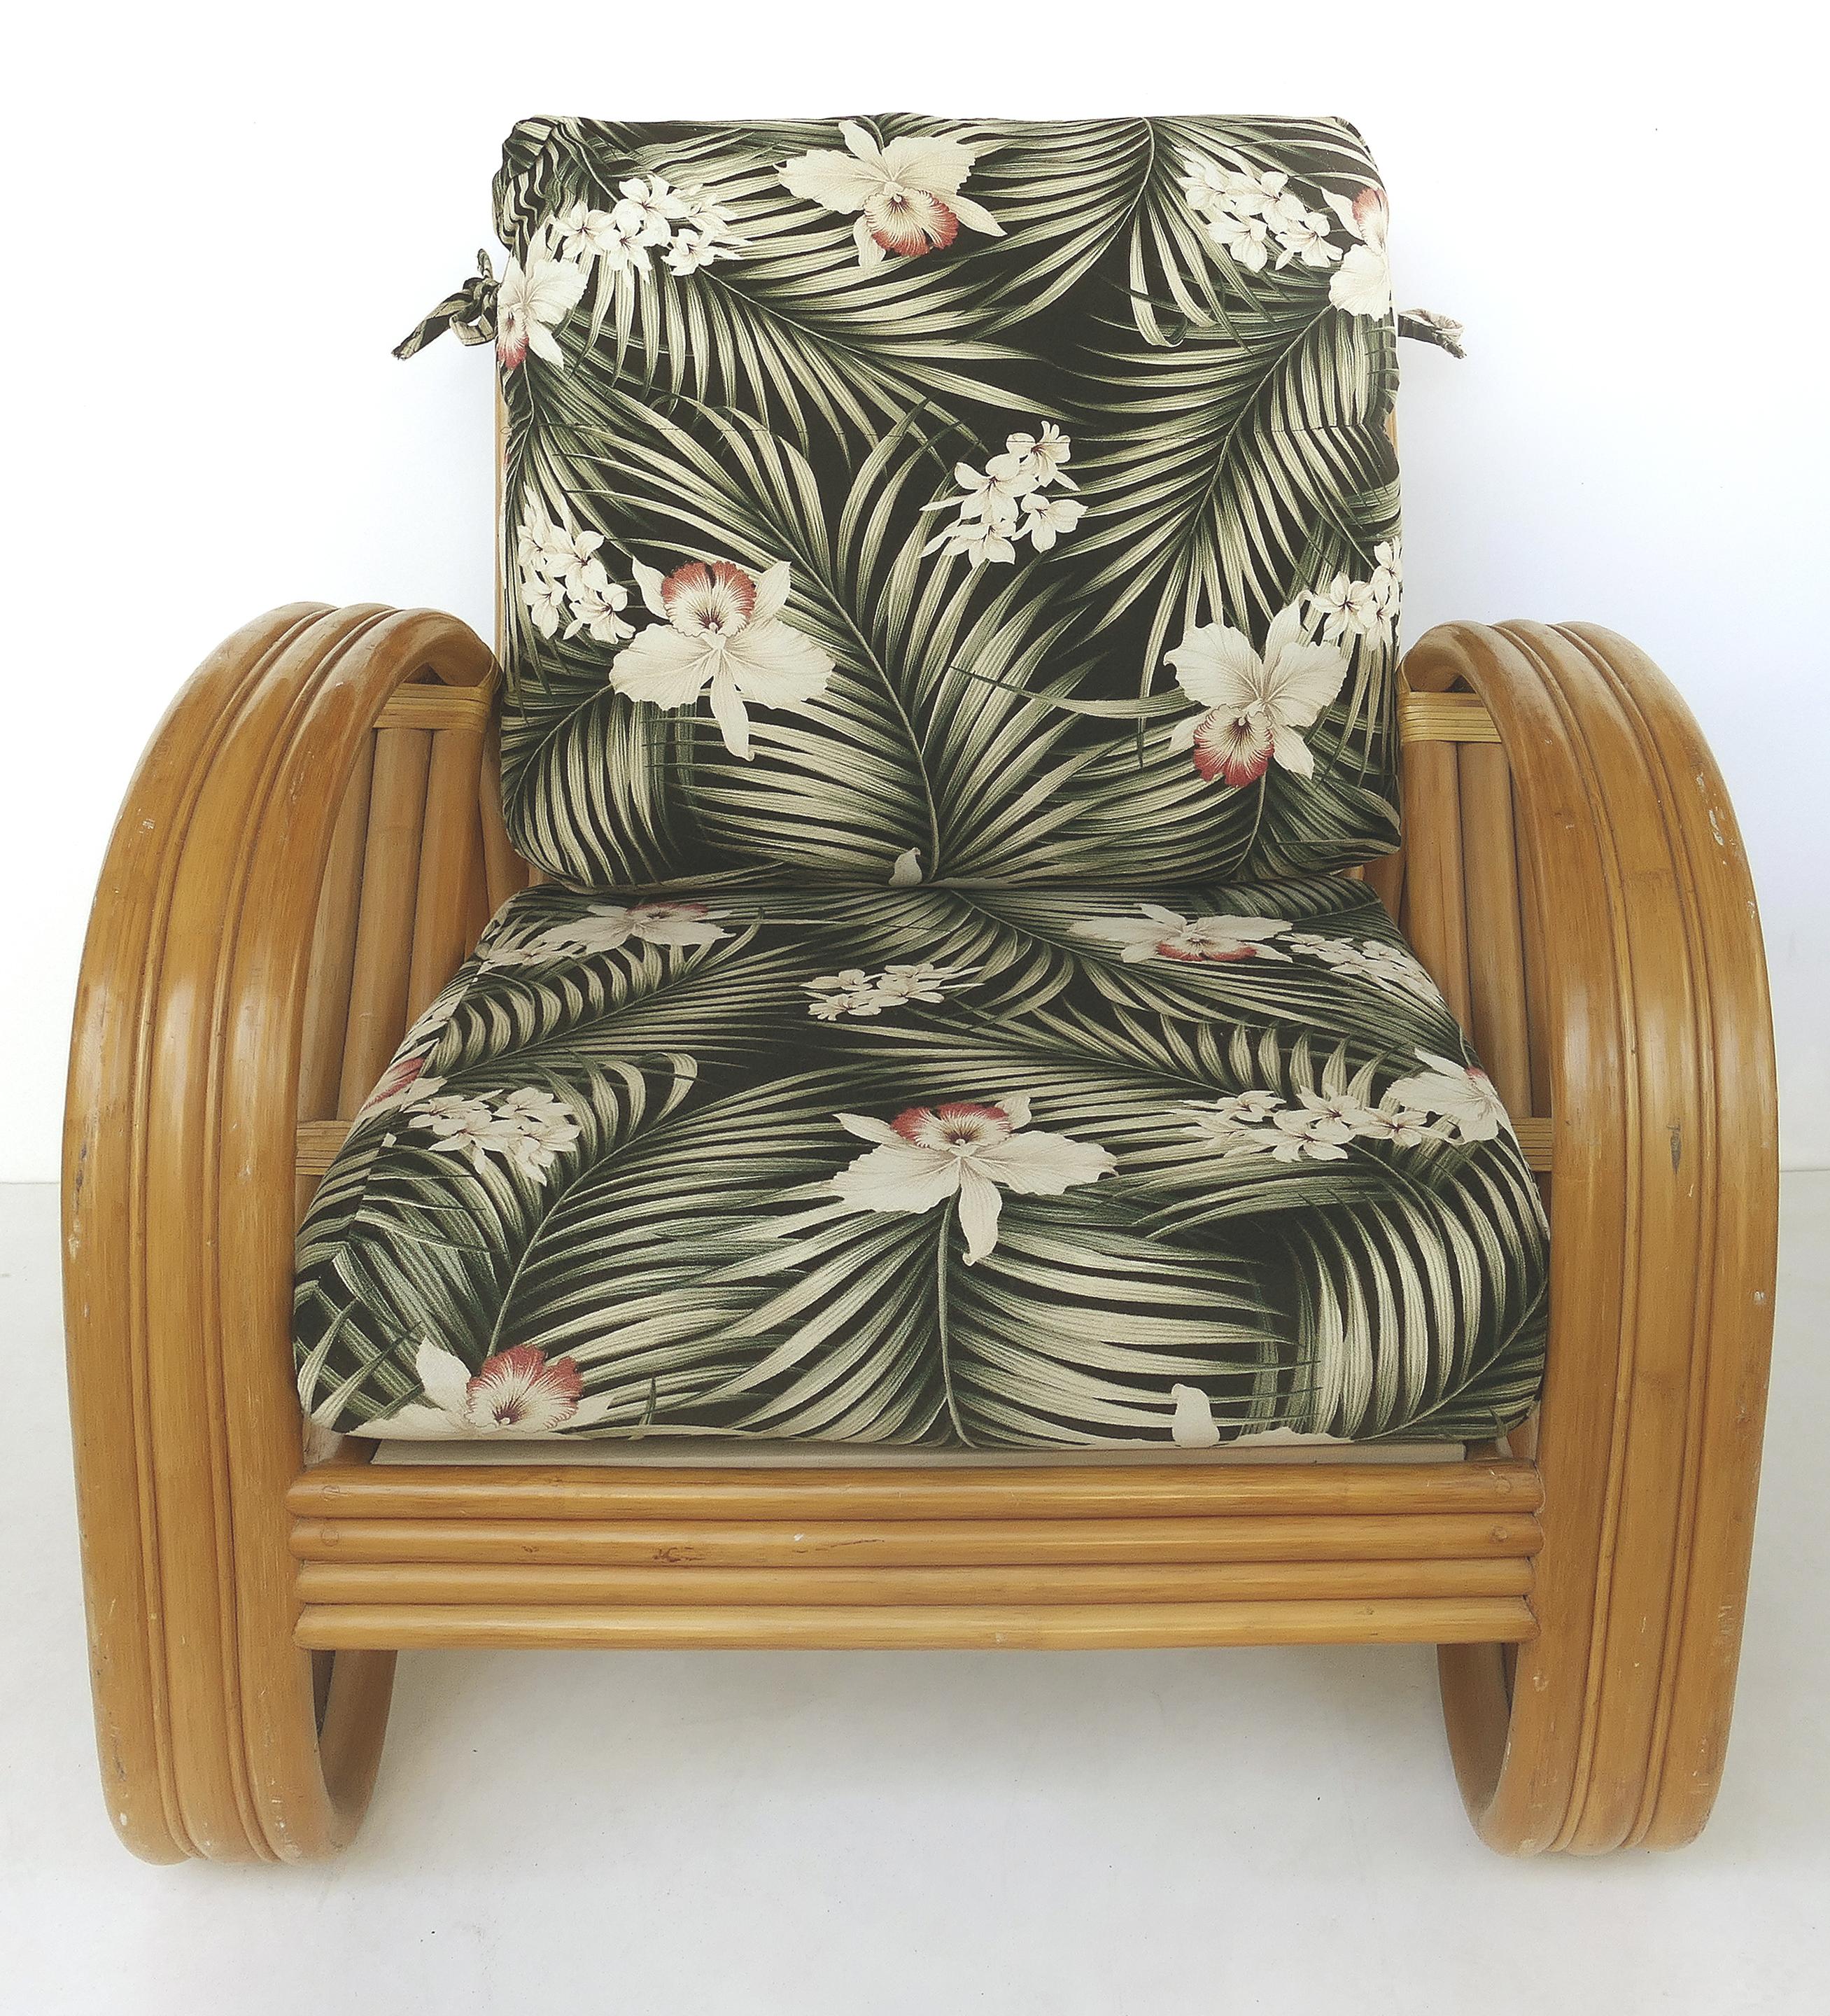 Paul Frankl style rattan pretzel club chair and ottoman with three bands

Offered for sale is a Mid-Century Modern pretzel club chair and ottoman in the manner of Paul Frankl. The set is from King's Rattan of California and is nicely upholstered